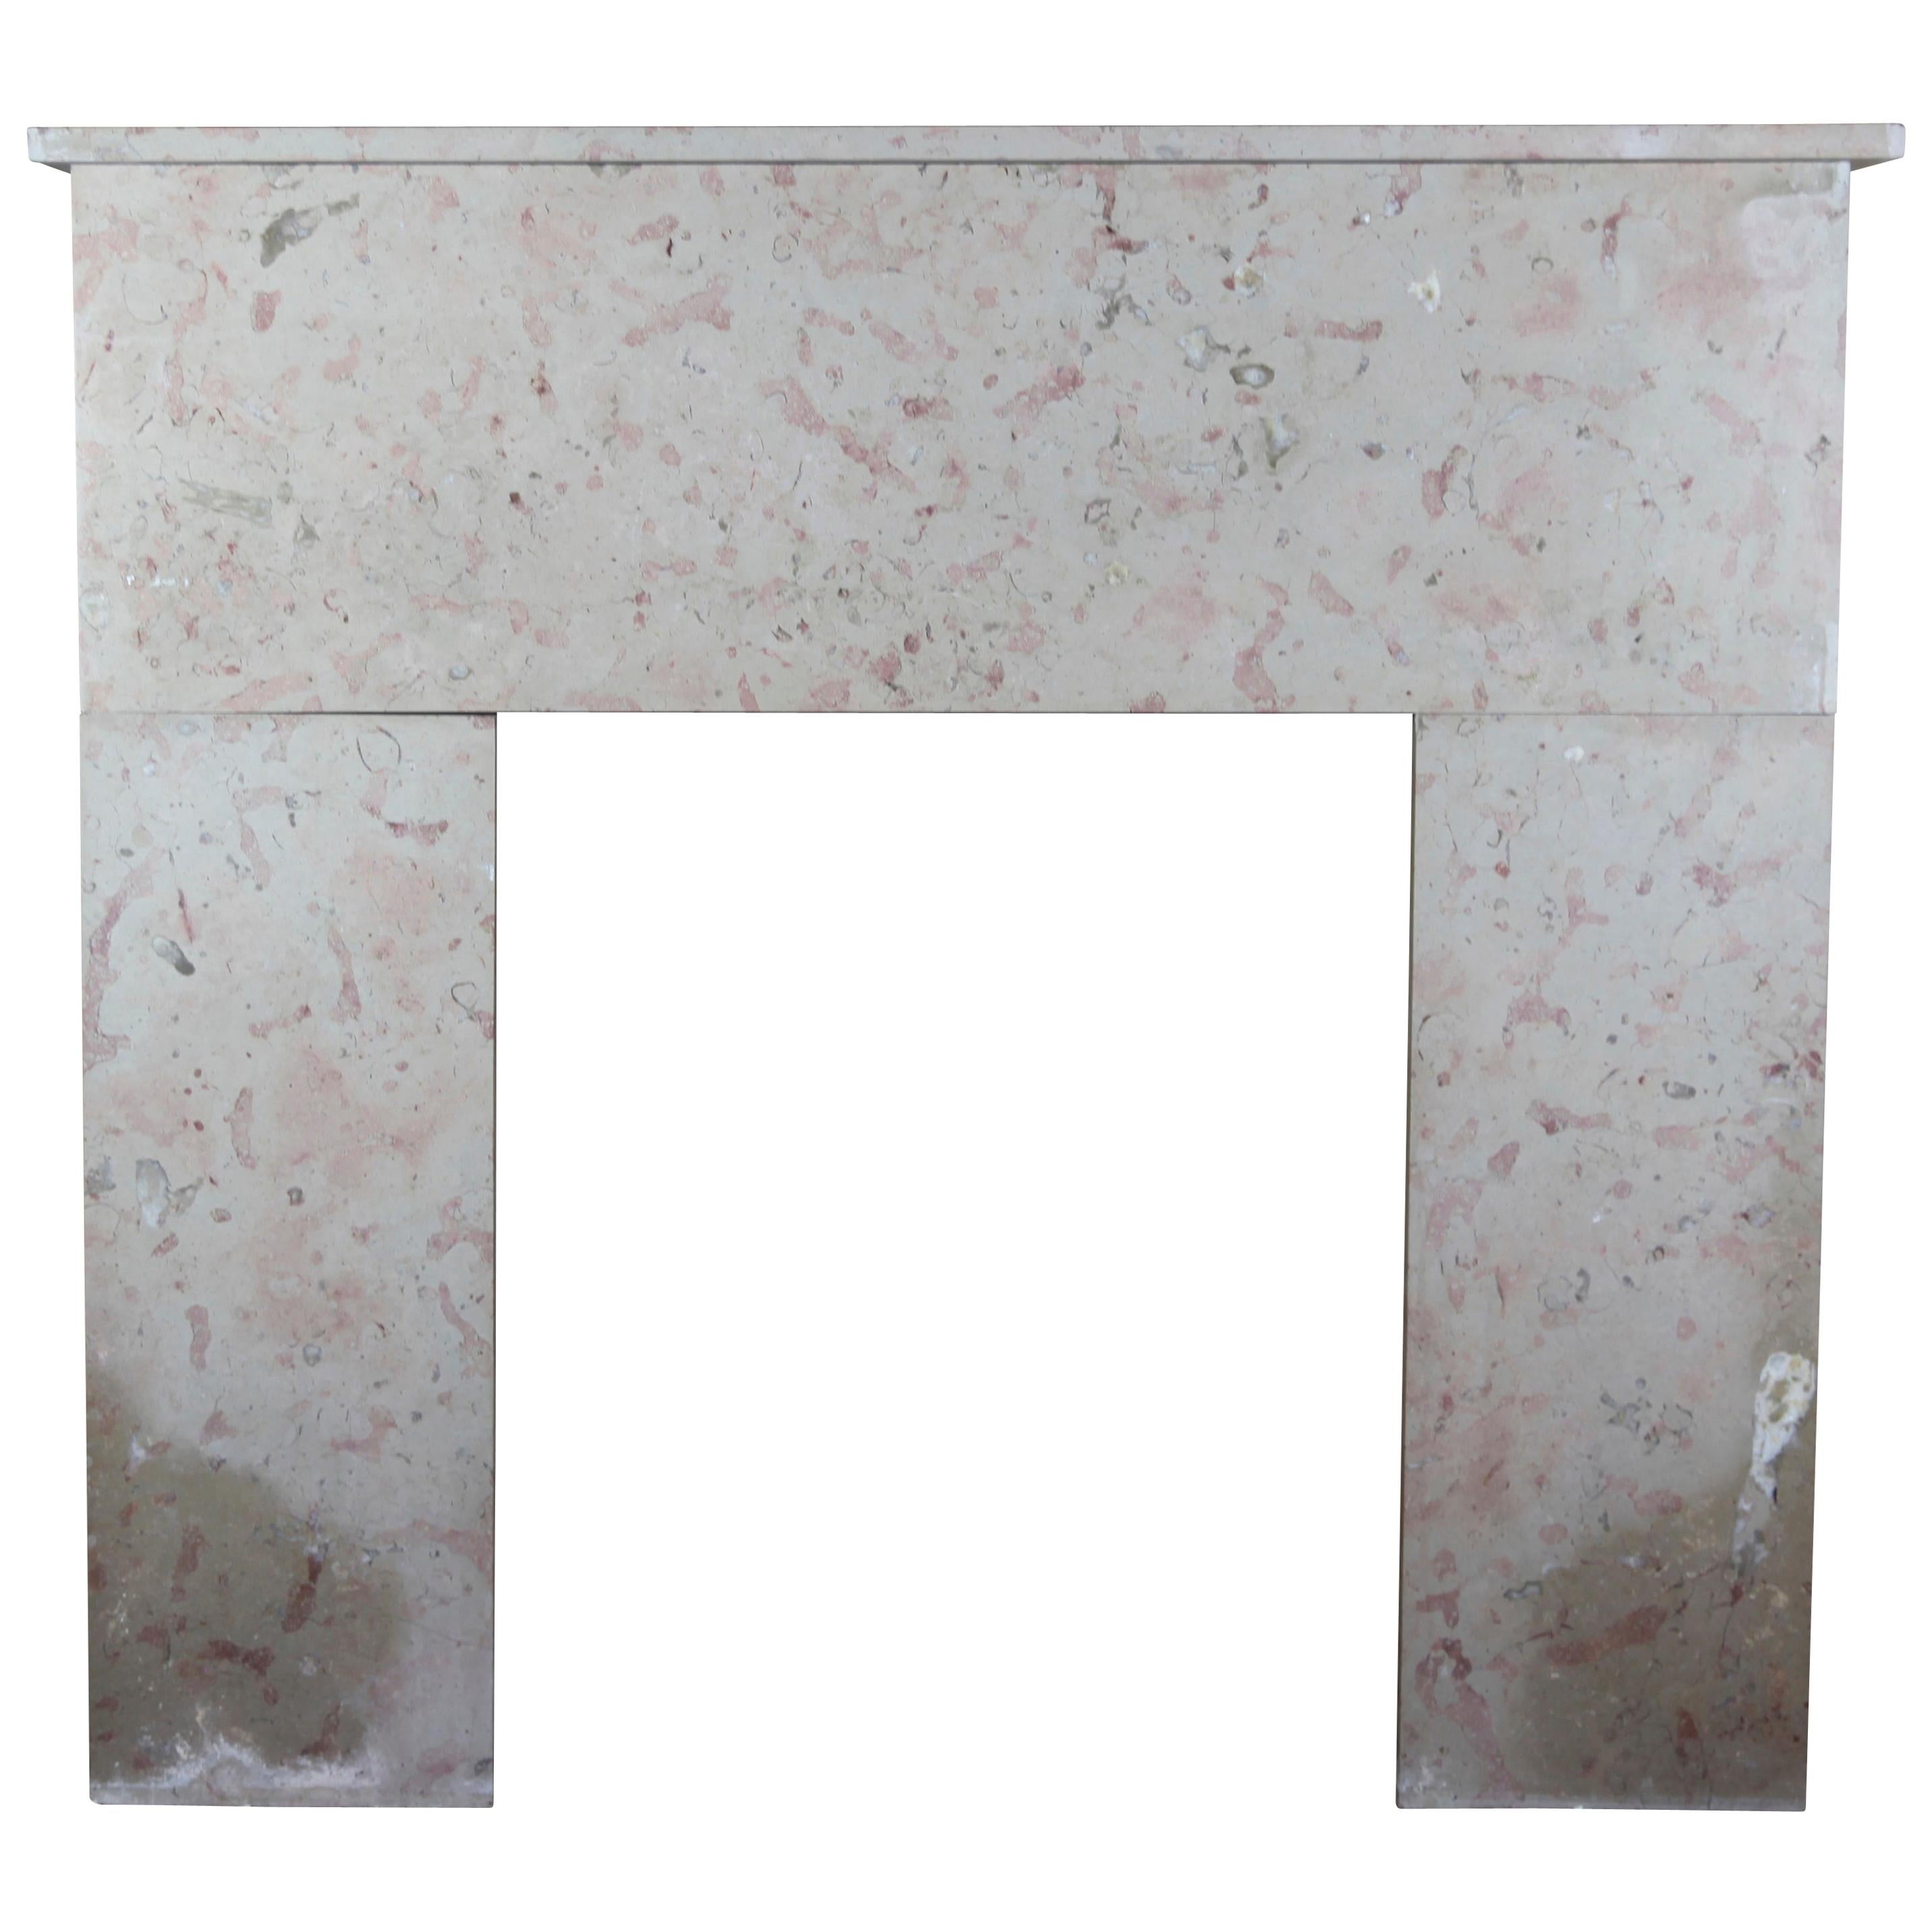 French 20th Century Comblanchien Stone Rustic Fireplace Surround For Sale